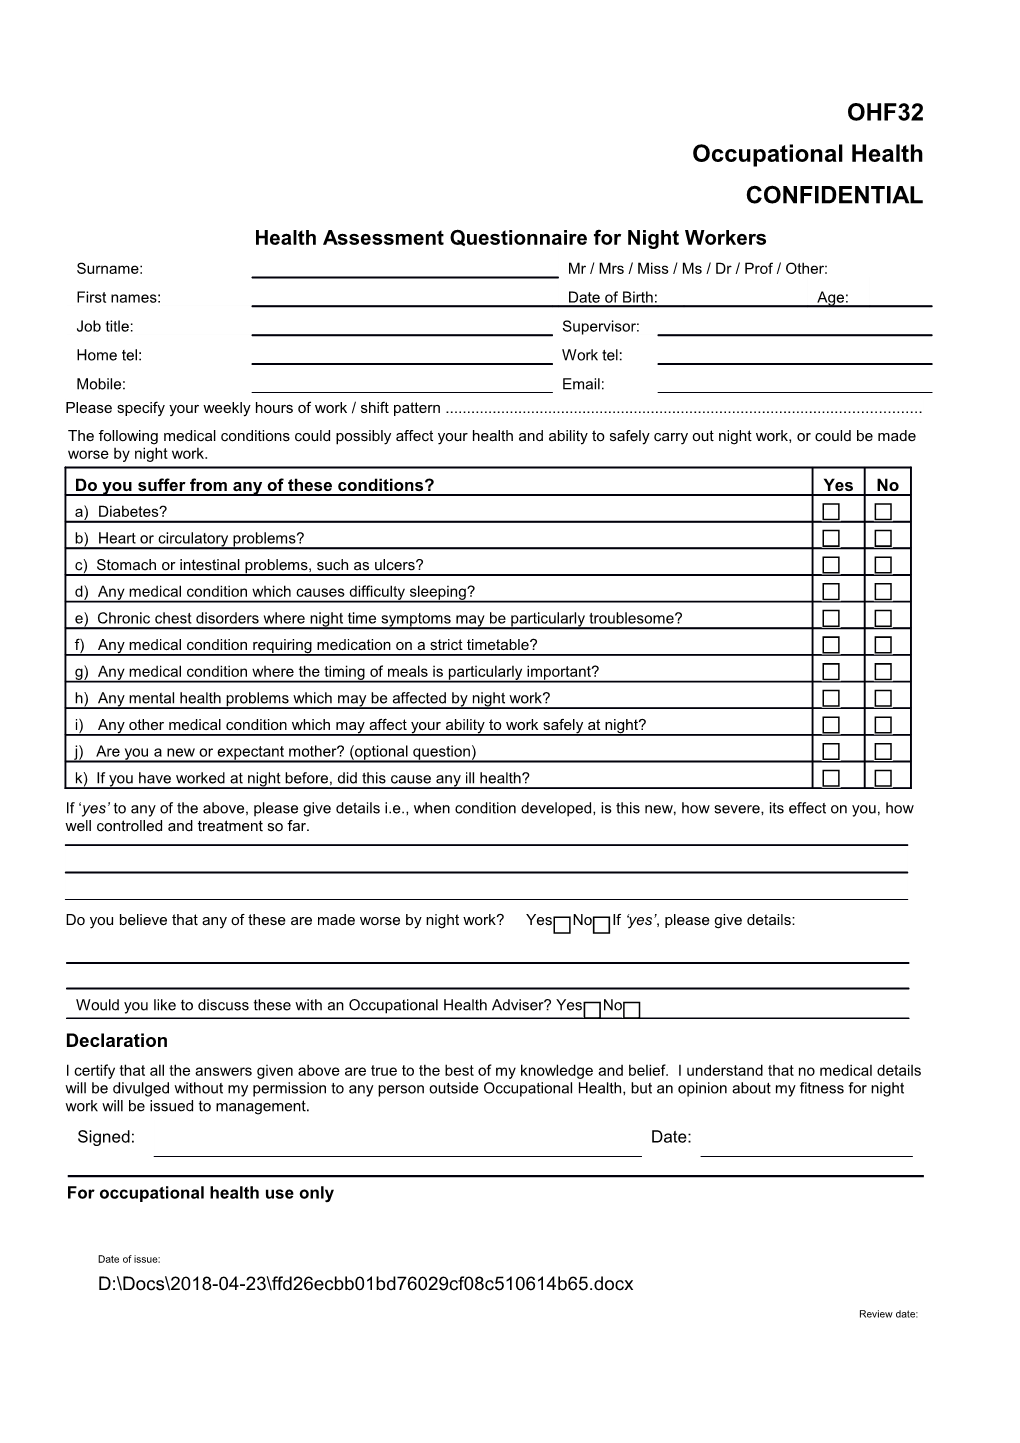 Health Assessment Questionnaire for Night Workers